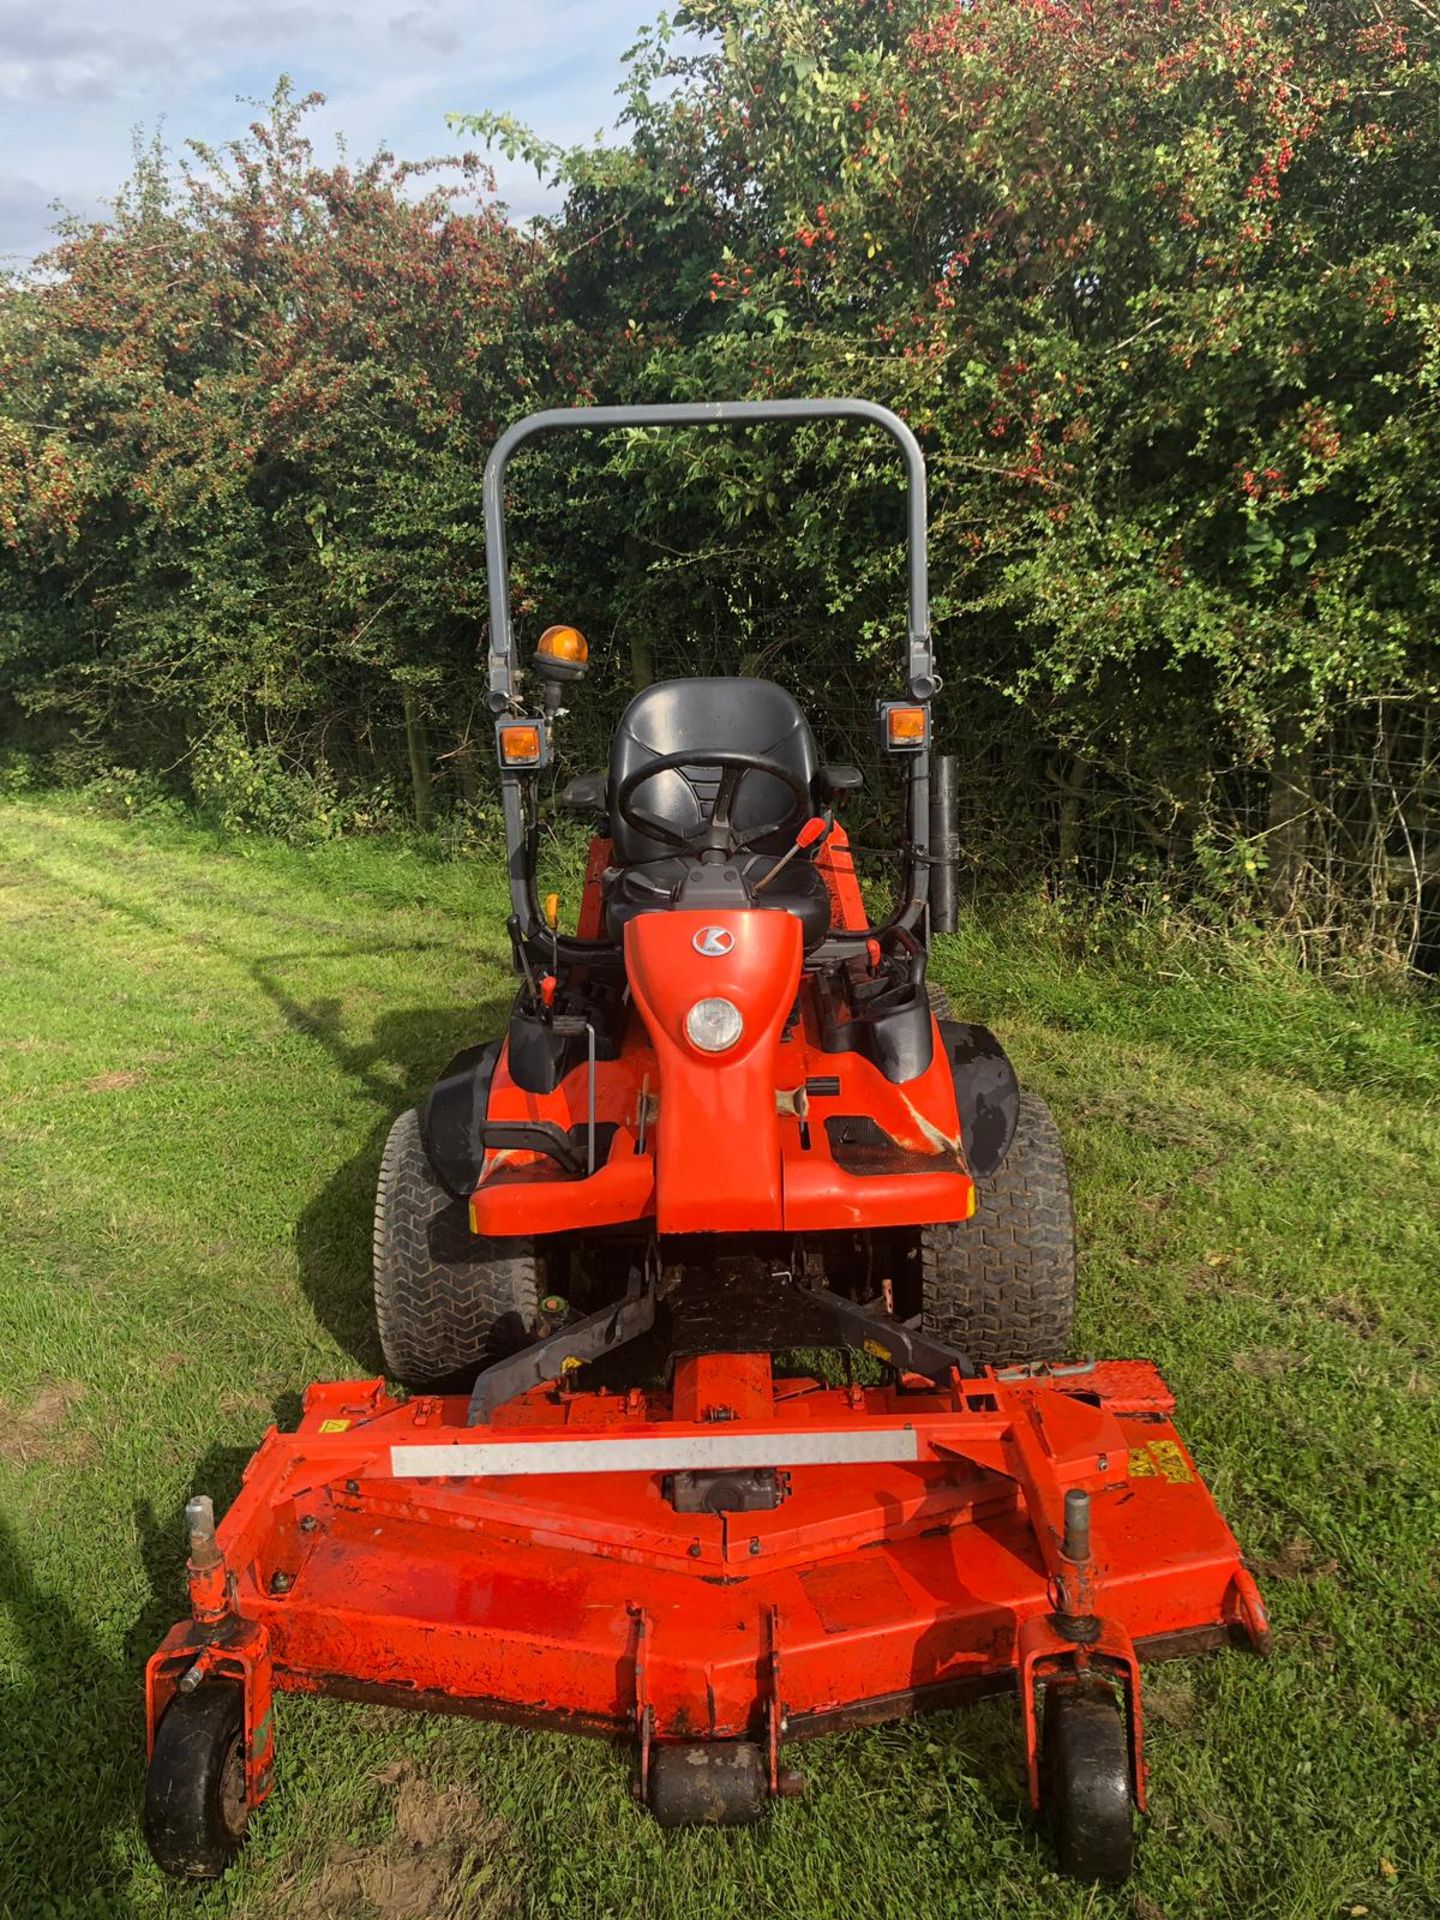 KUBTOA F3680 RIDE ON LAWN MOWER, RUNS WORKS AND CUTS, YEAR 2013 *PLUS VAT* - Image 2 of 8